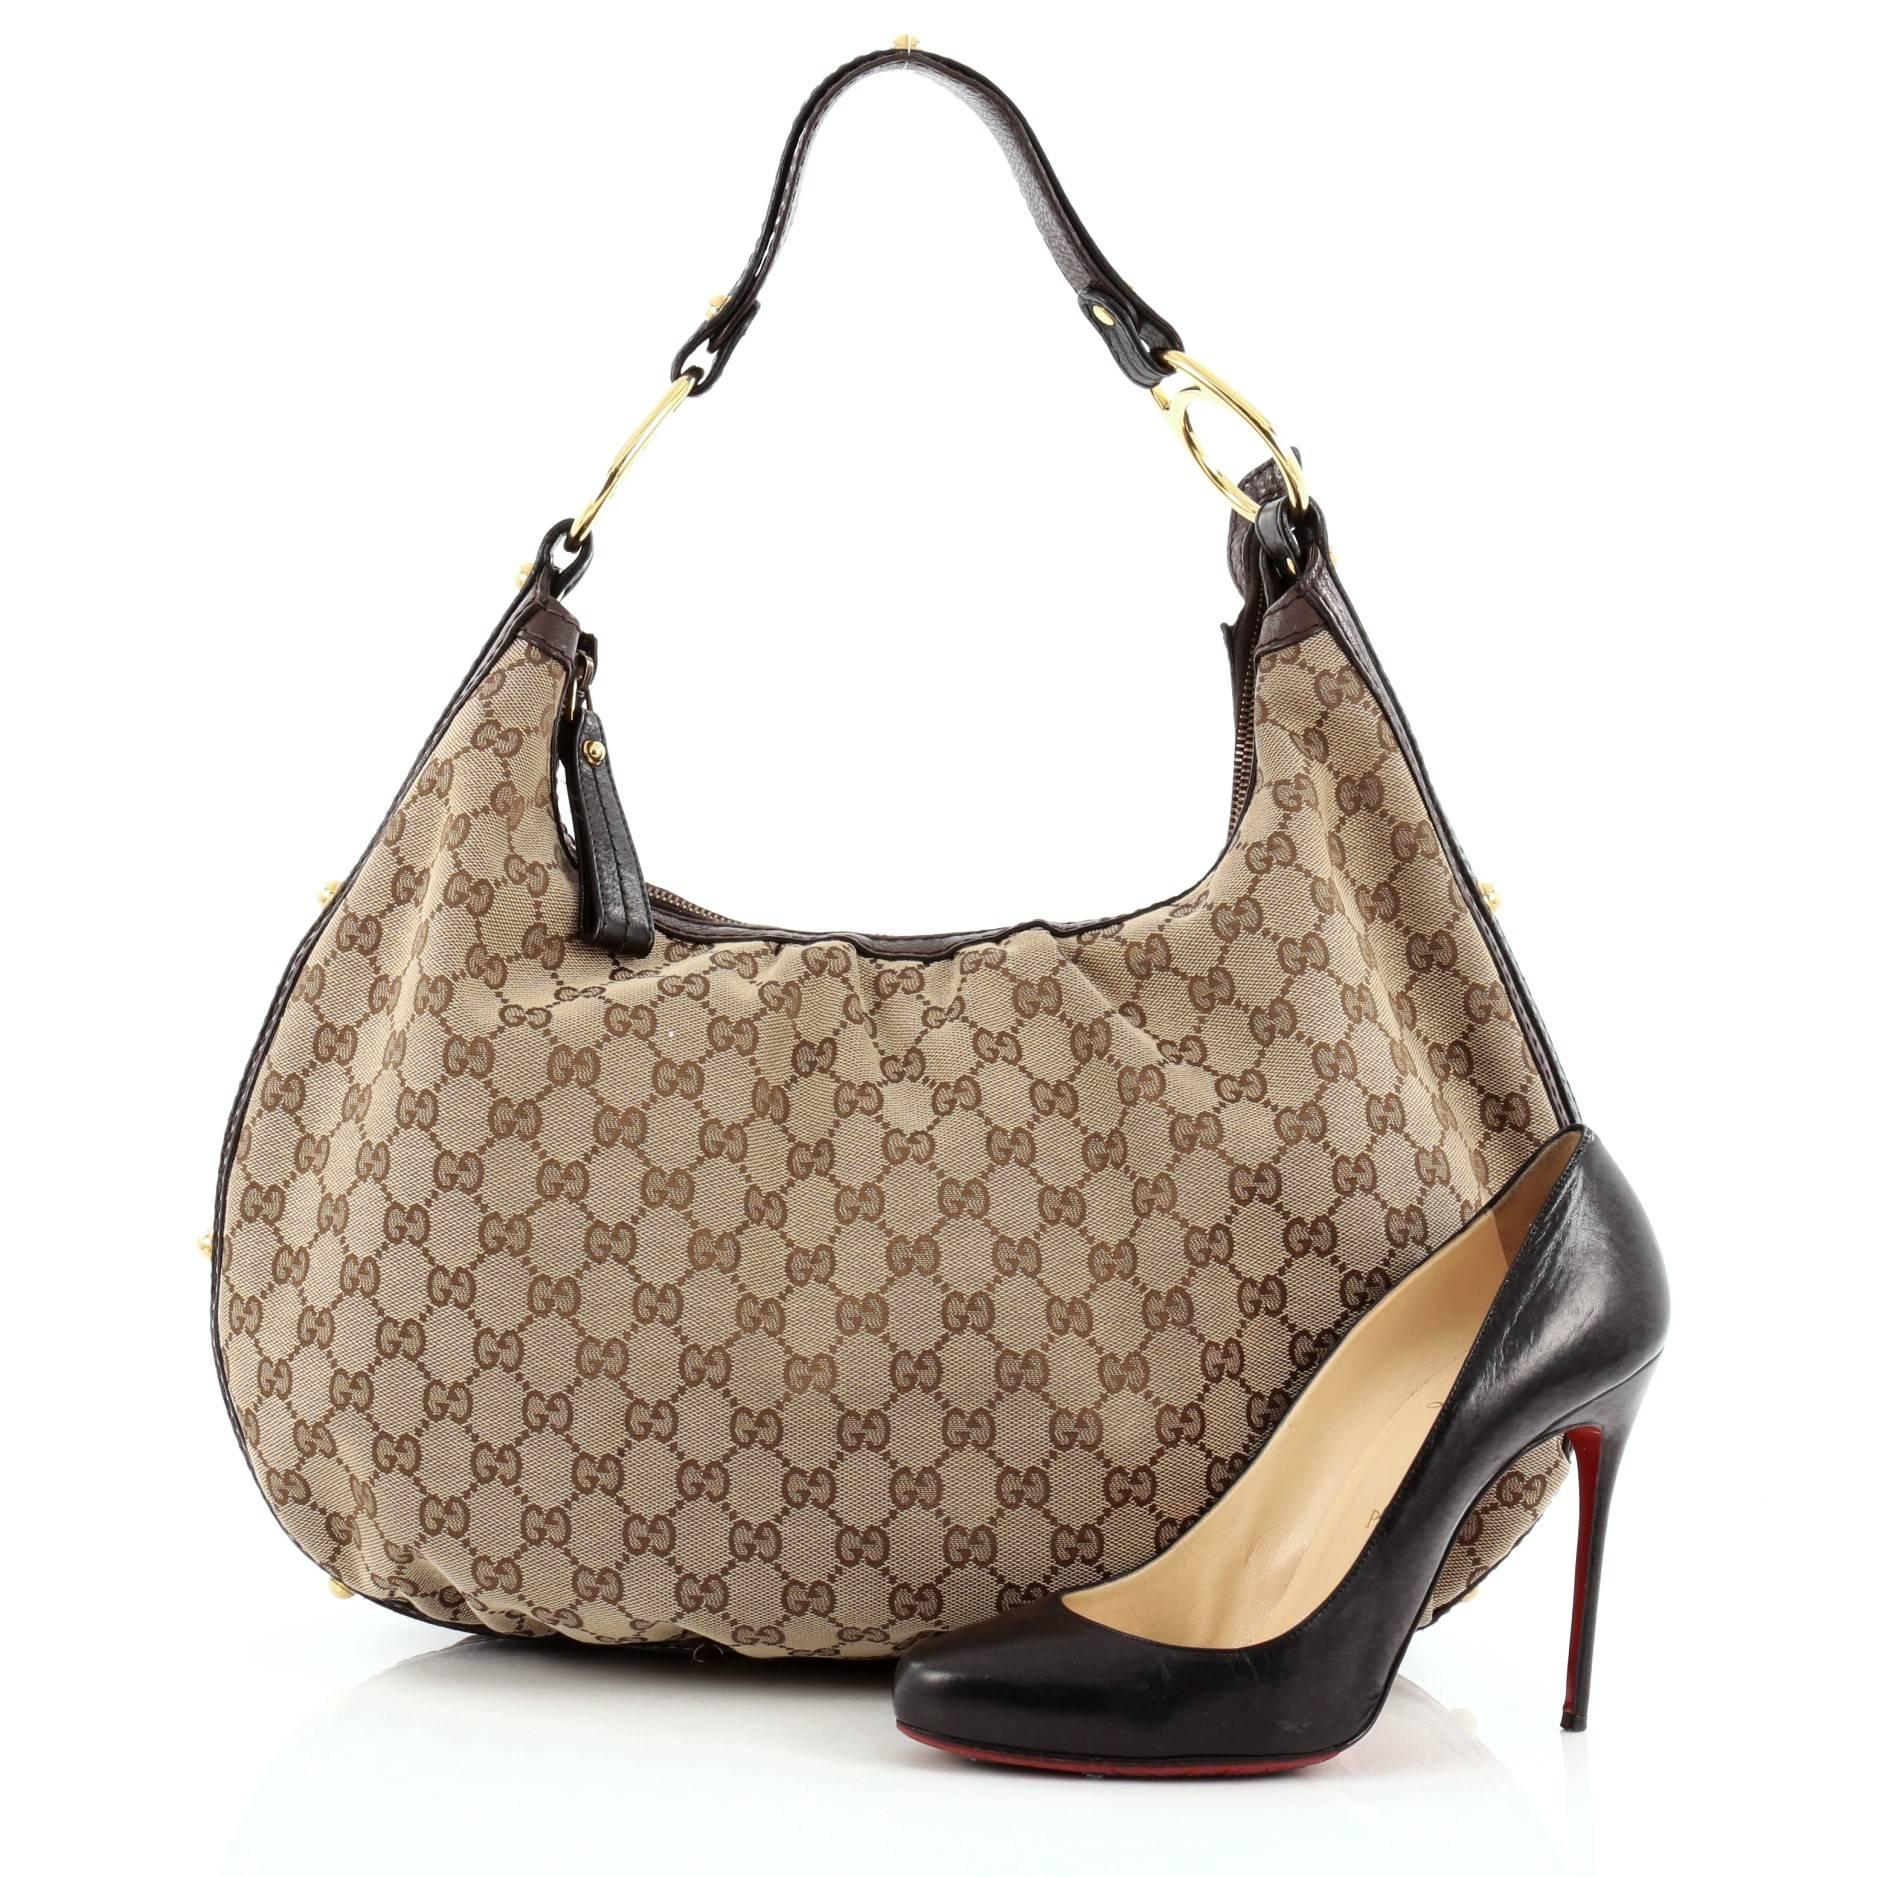 This authentic Gucci Interlocking Hobo GG Canvas Medium is an easy to carry, everyday accessory that is both stylish and functional. Crafted from Gucci's brown GG canvas, this no-fuss hobo features a pleated silhouette, leather strap with Gucci